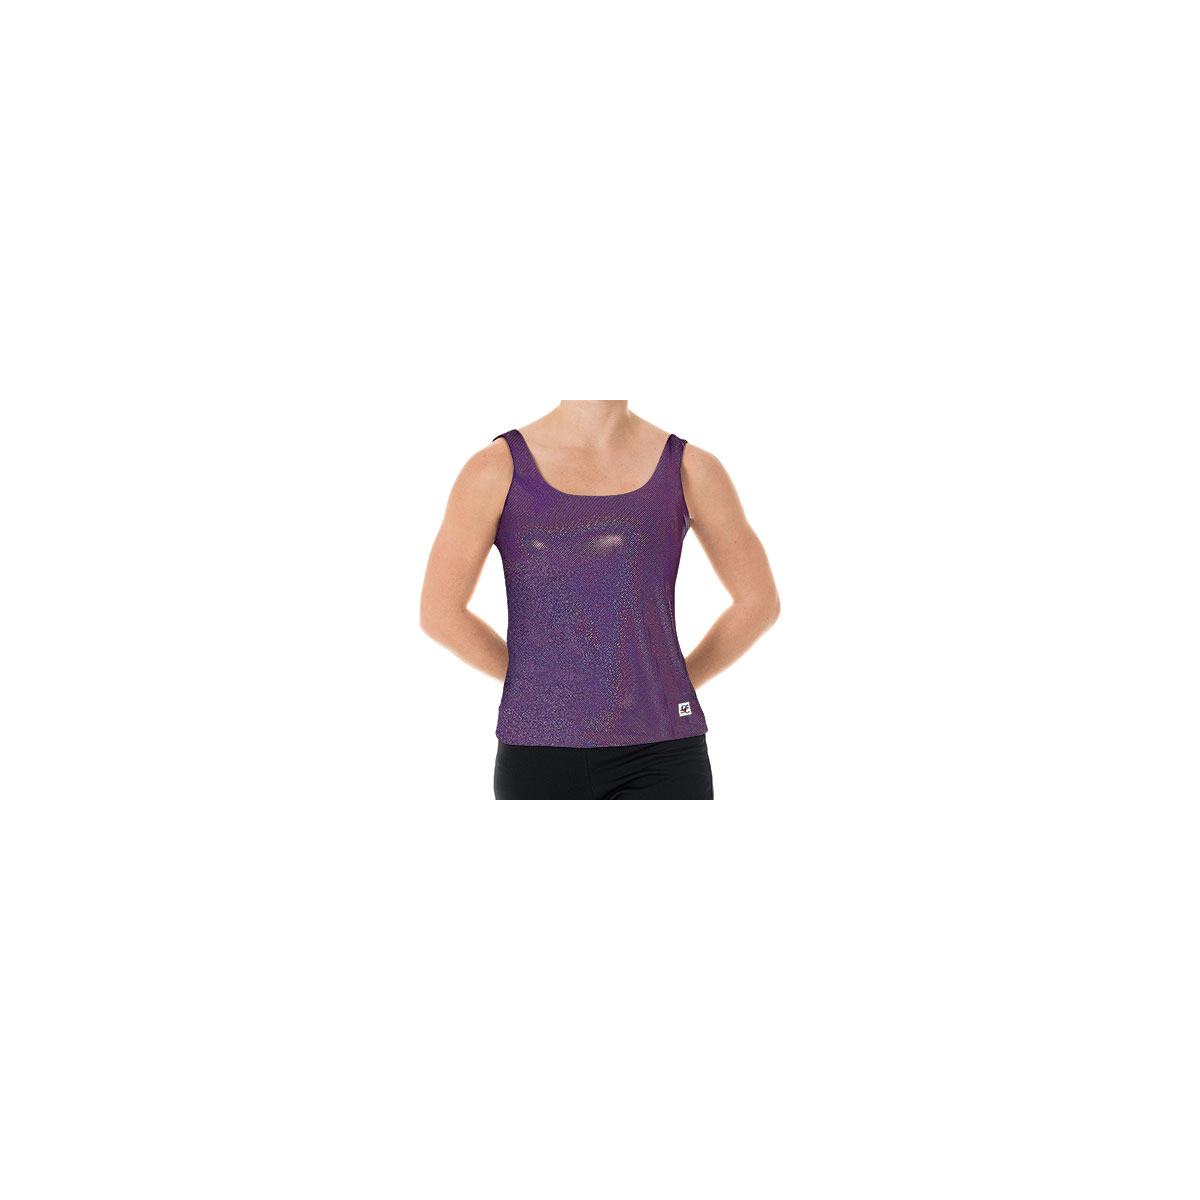 SpiritFlex Scoop Neck Shell with Open Back